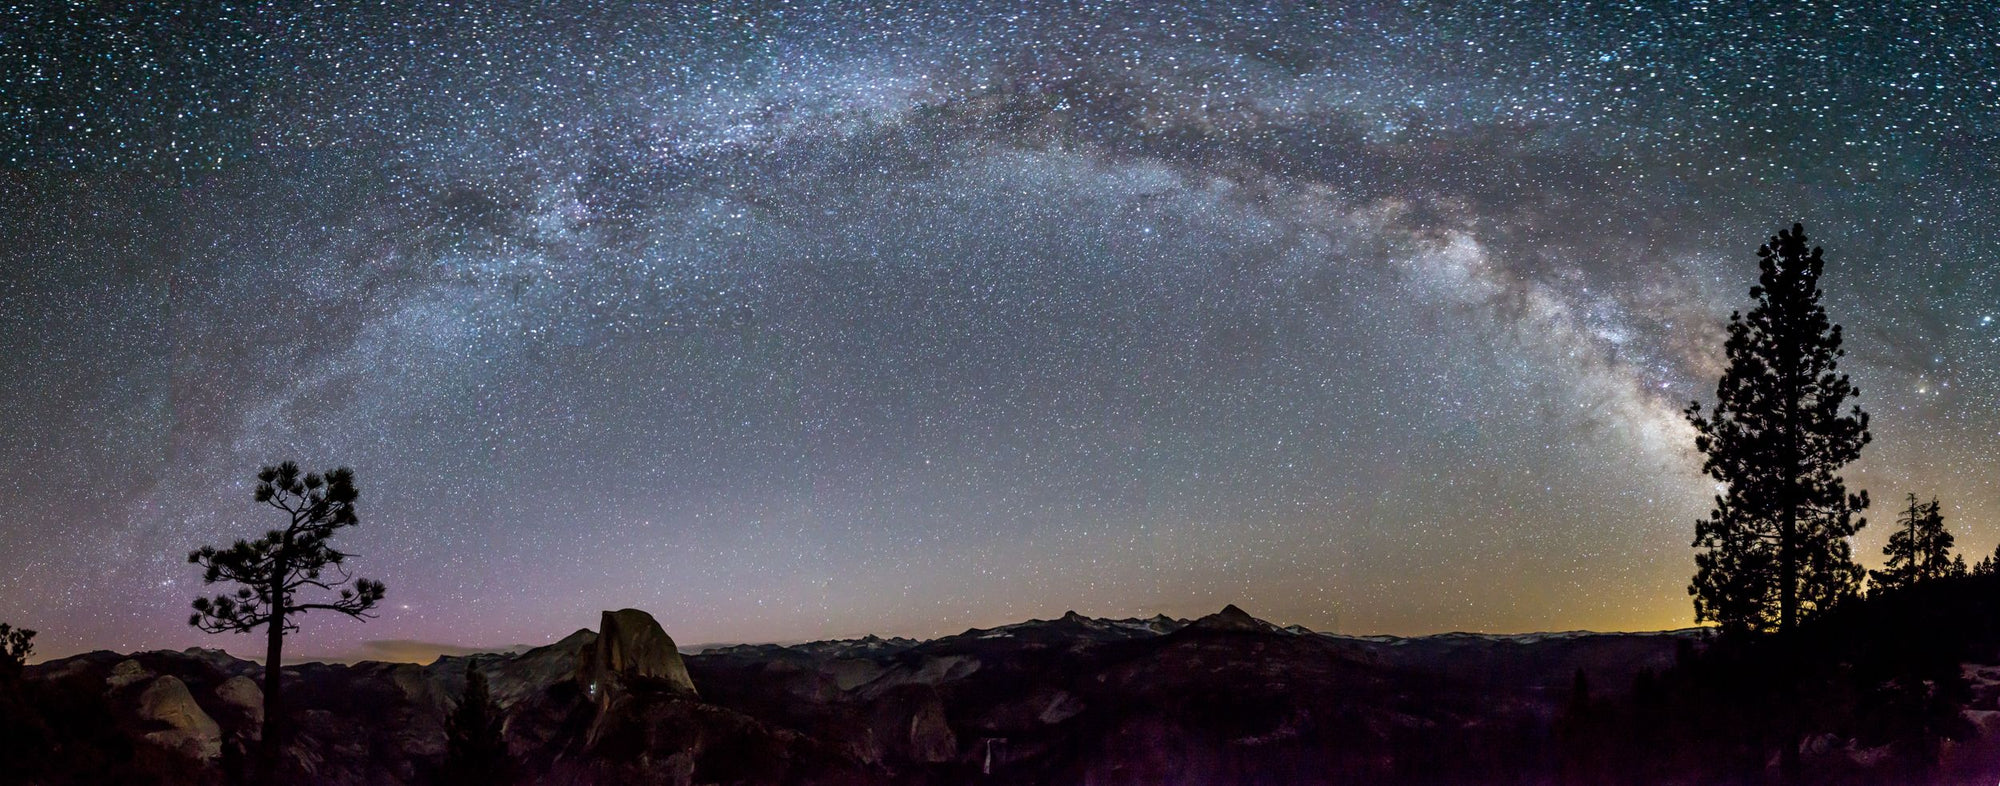 The Milky Way arches over Half Dome in Yosemite National Park.